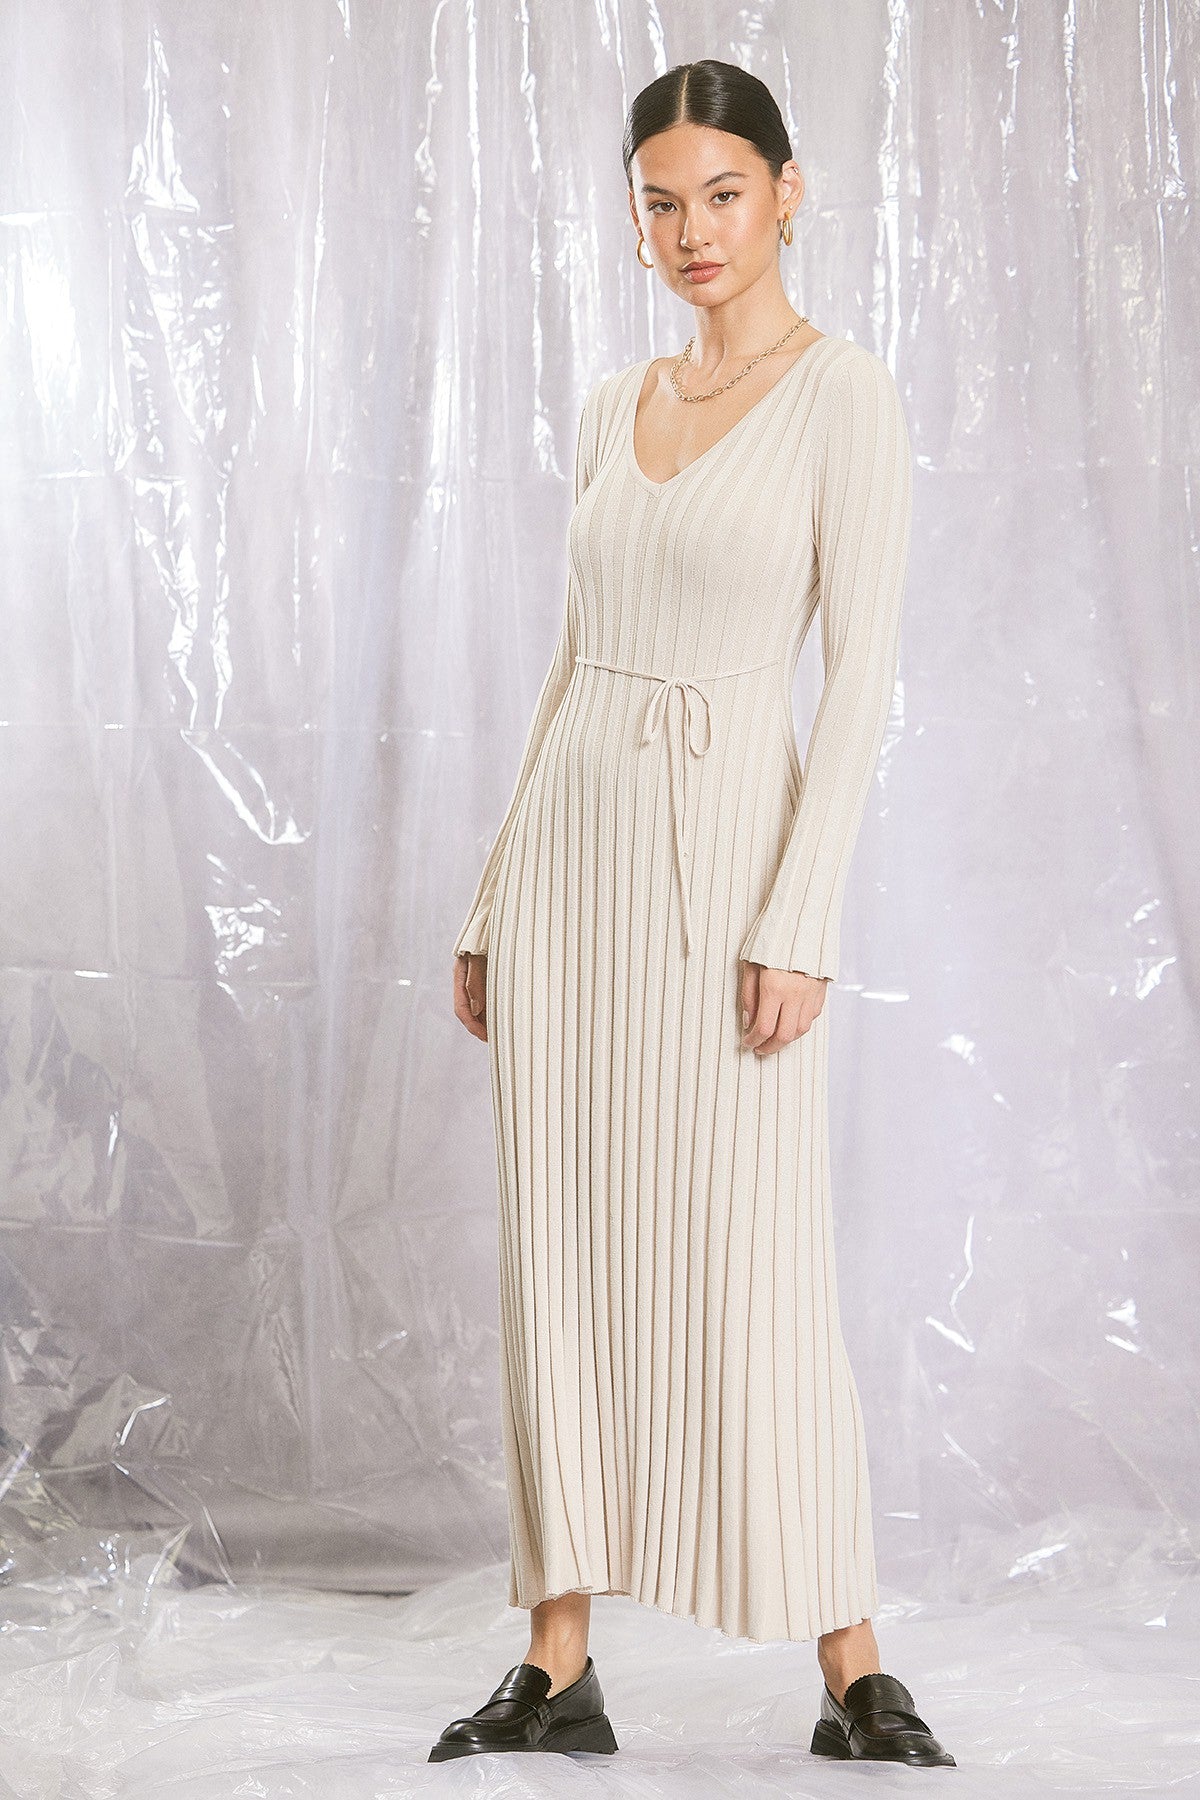 reign ribbed sleeved maxi dress